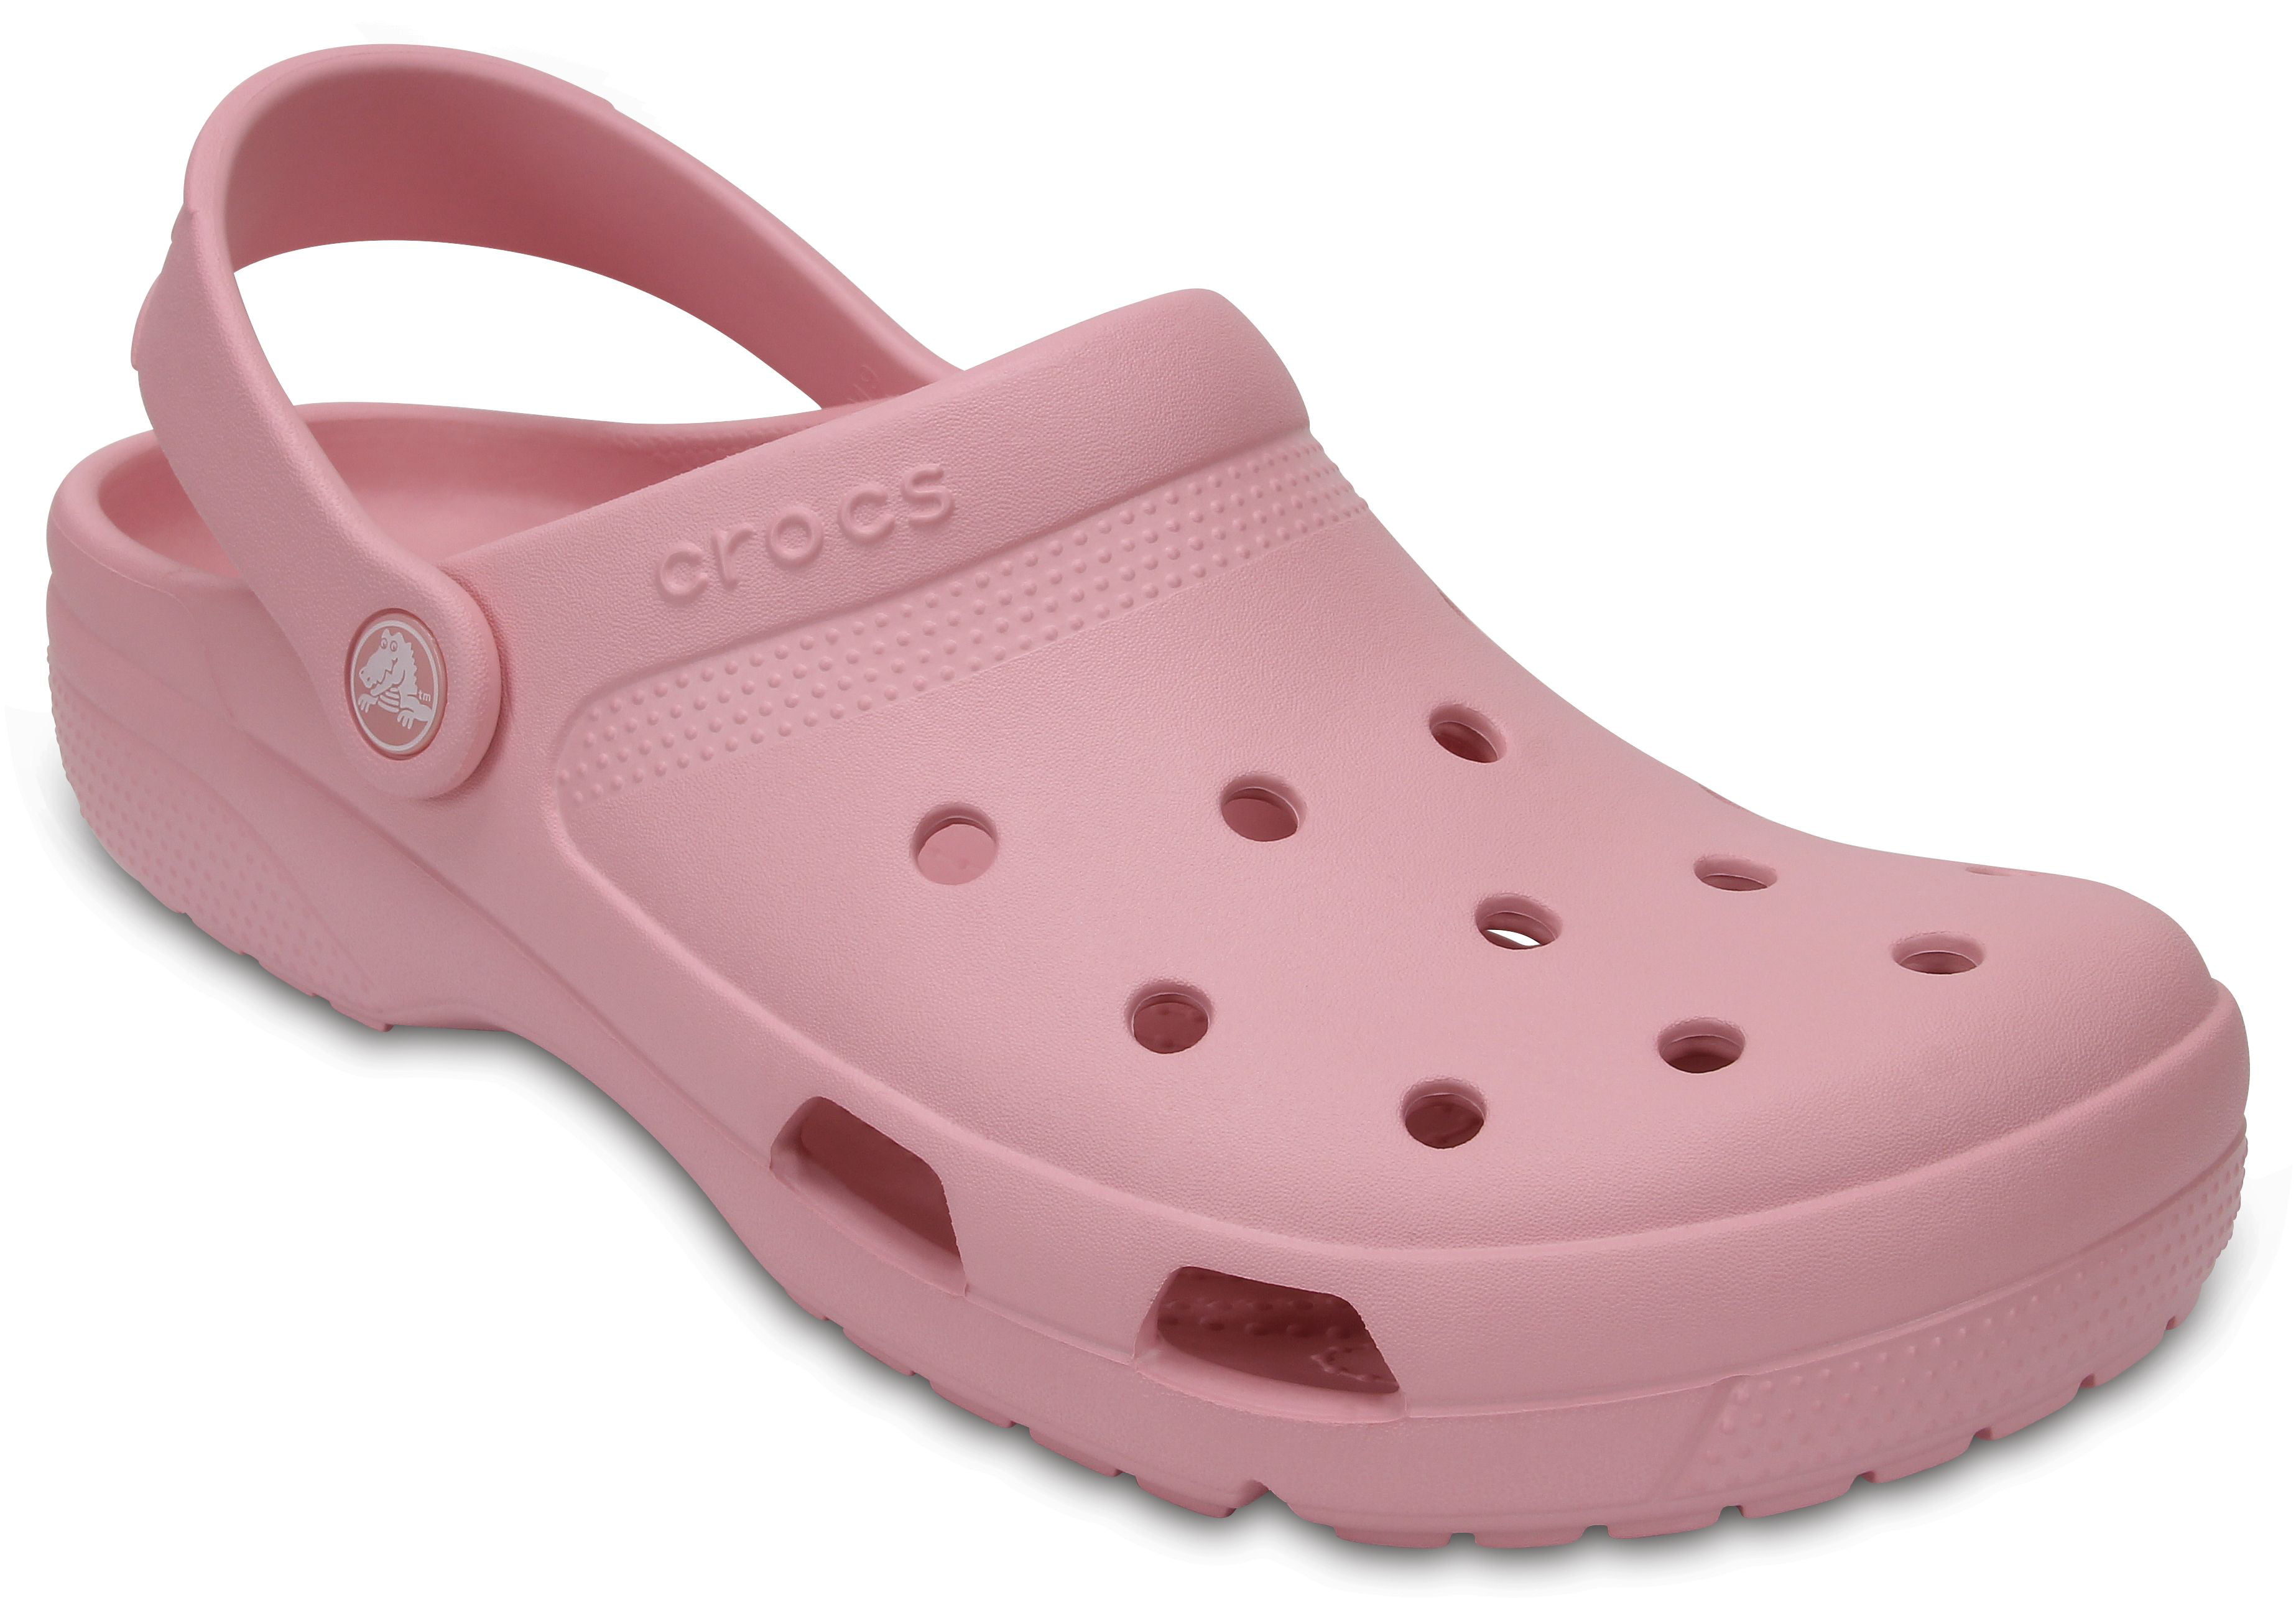 does target carry crocs